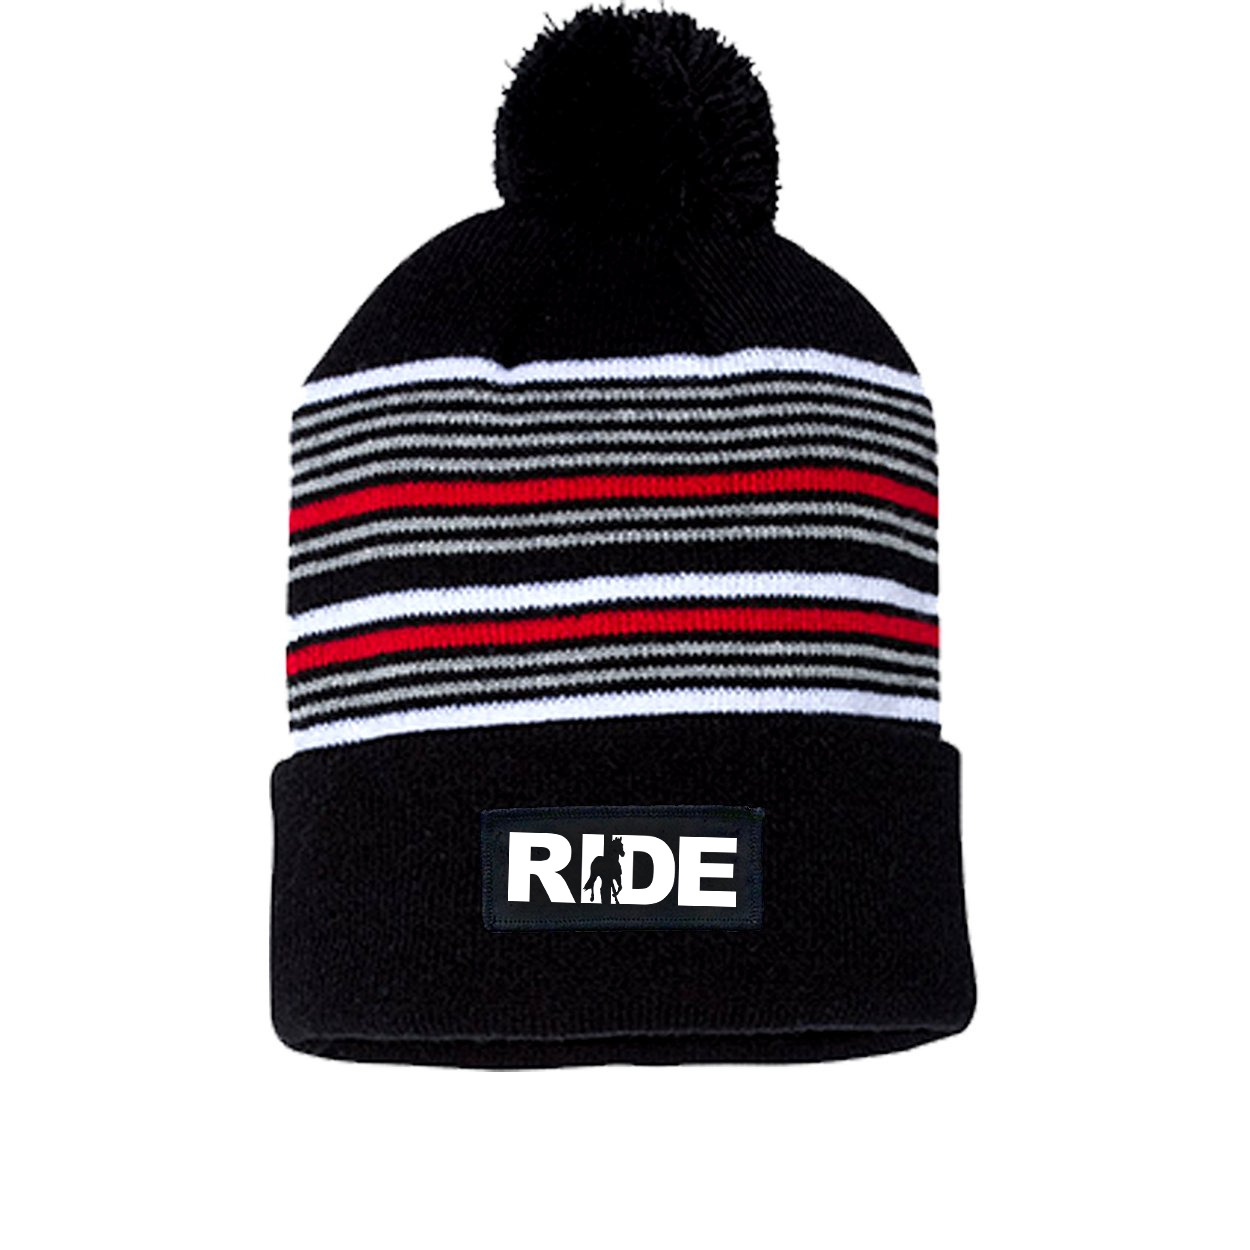 Ride Horse Logo Night Out Woven Patch Roll Up Pom Knit Beanie Black/ White/ Grey/ Red Beanie (White Logo)